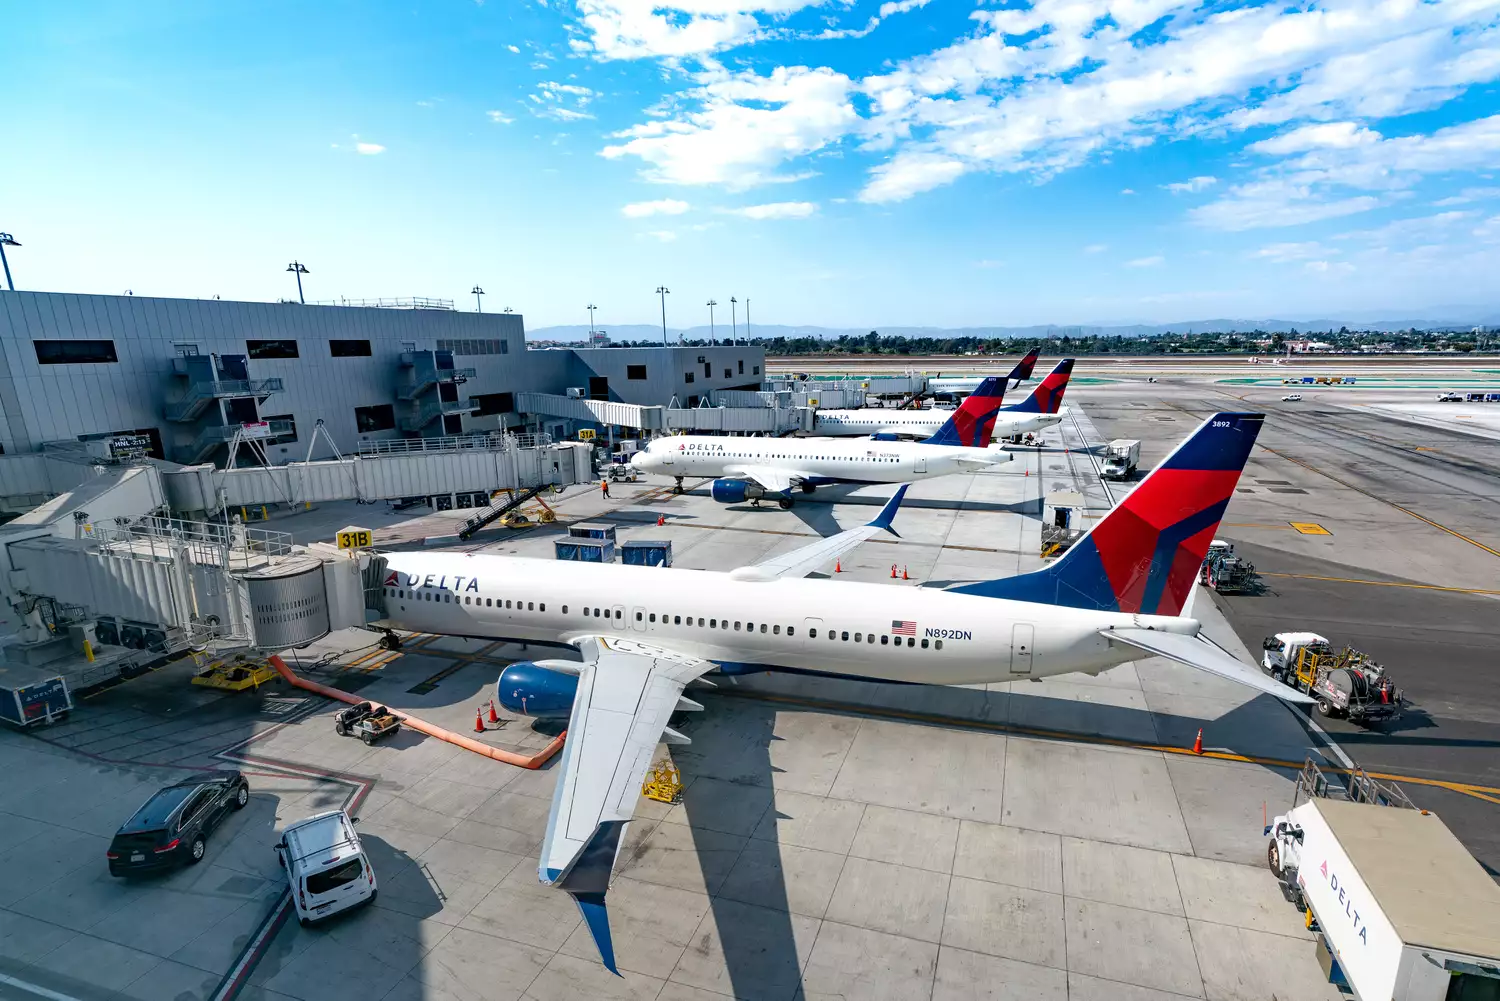 Now, you may use free WiFi on the majority of Delta flights.